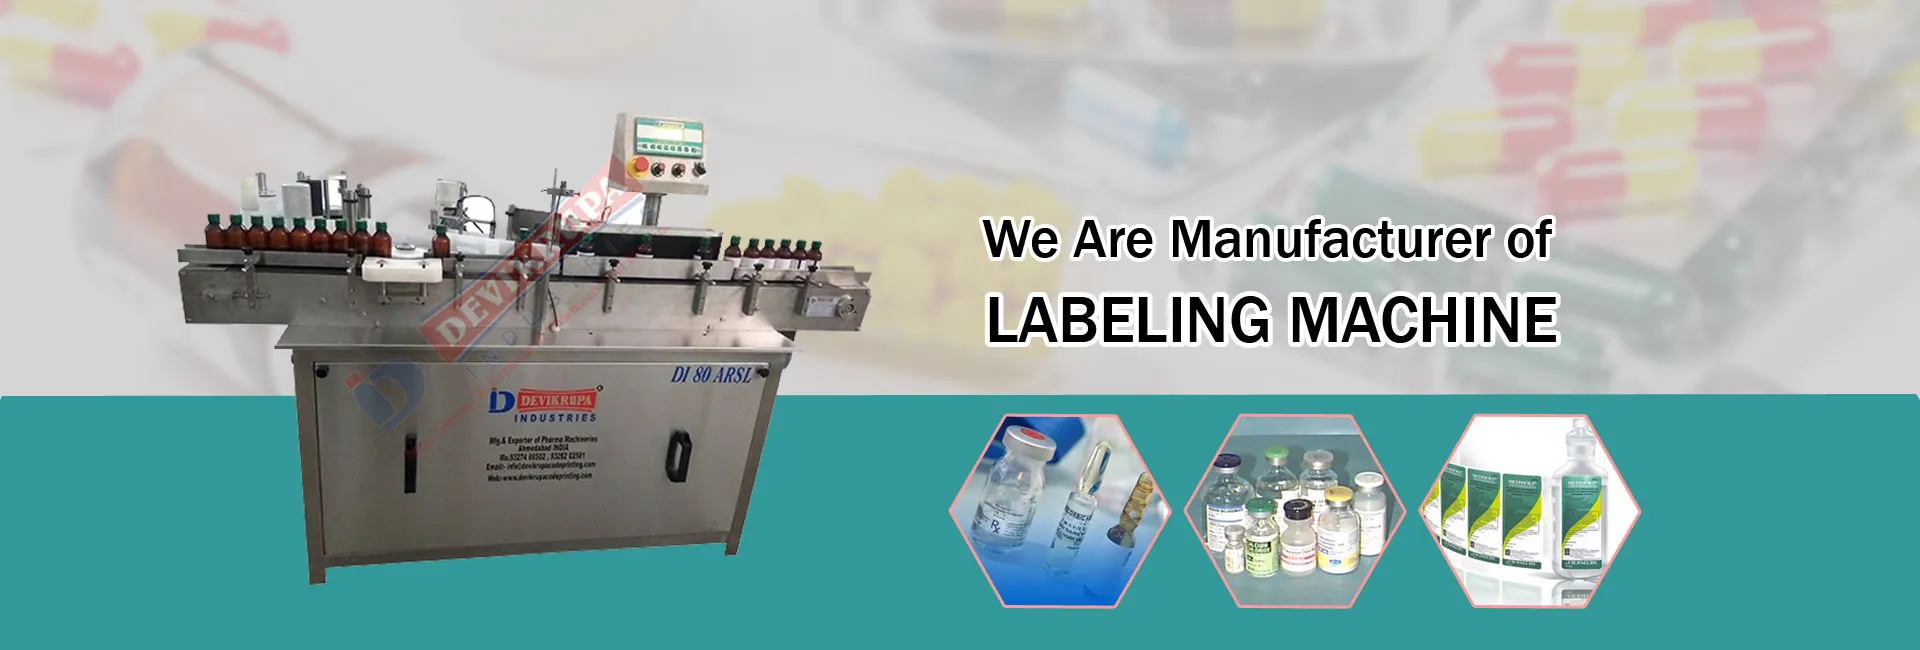 Labeling Machine Manufacturer, Supplier In India